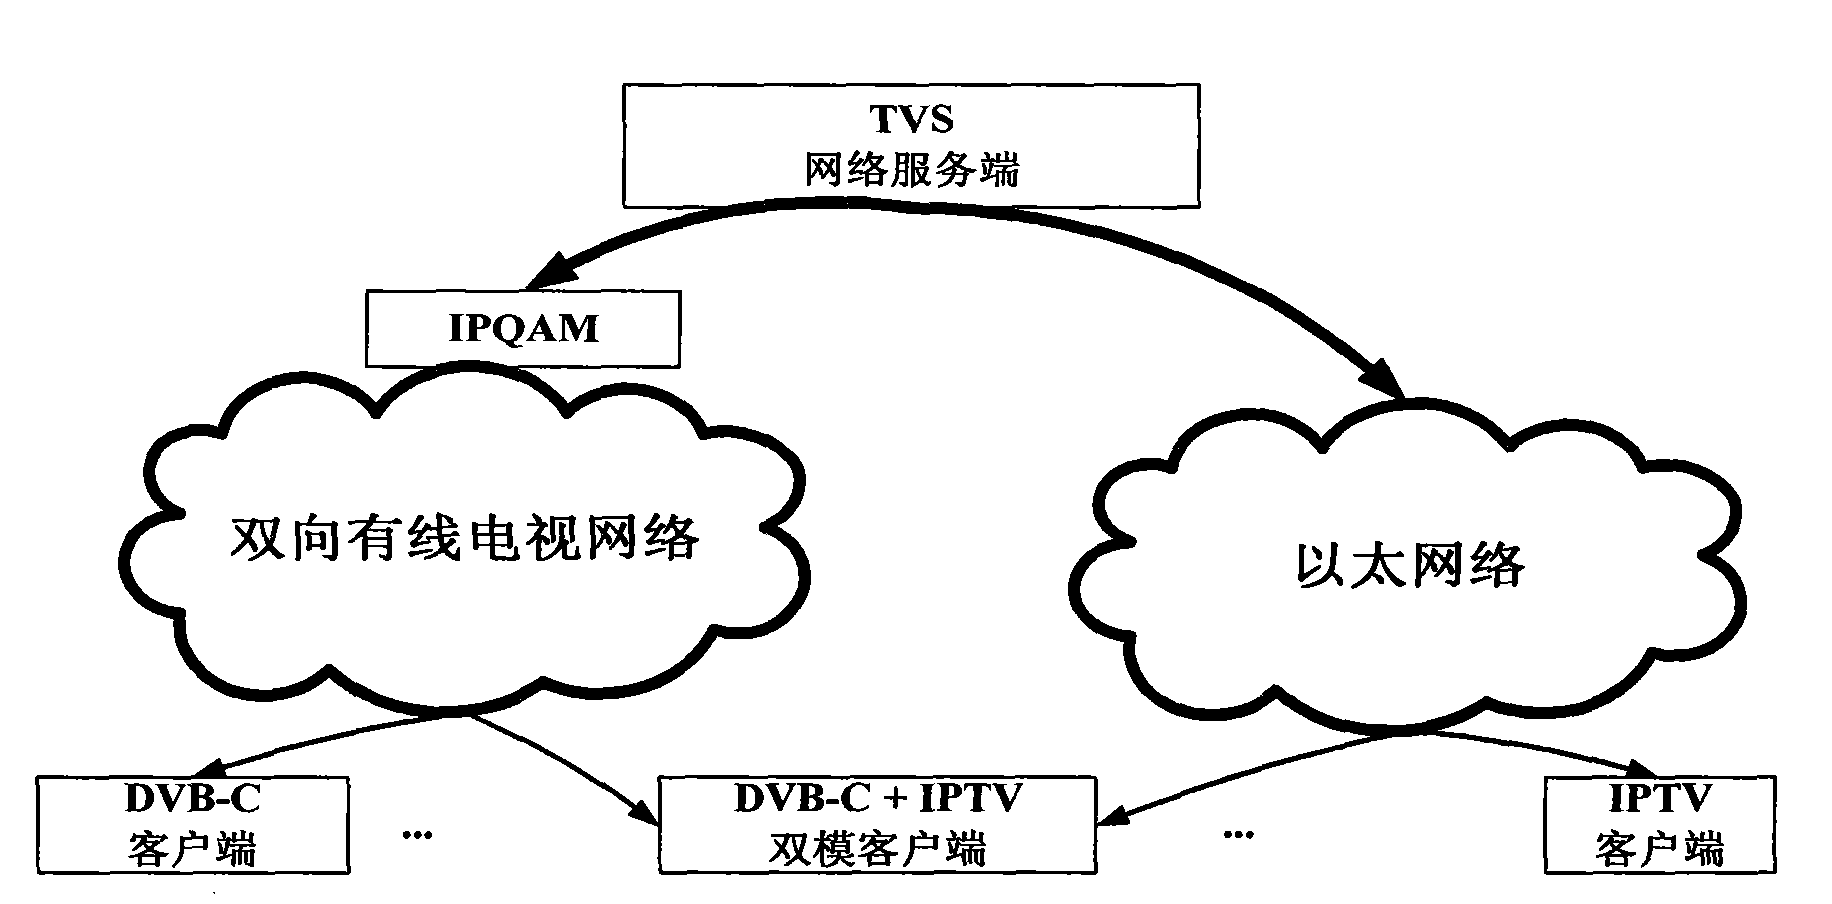 Method and system for implementing network time-shifted television supporting DVB CAS